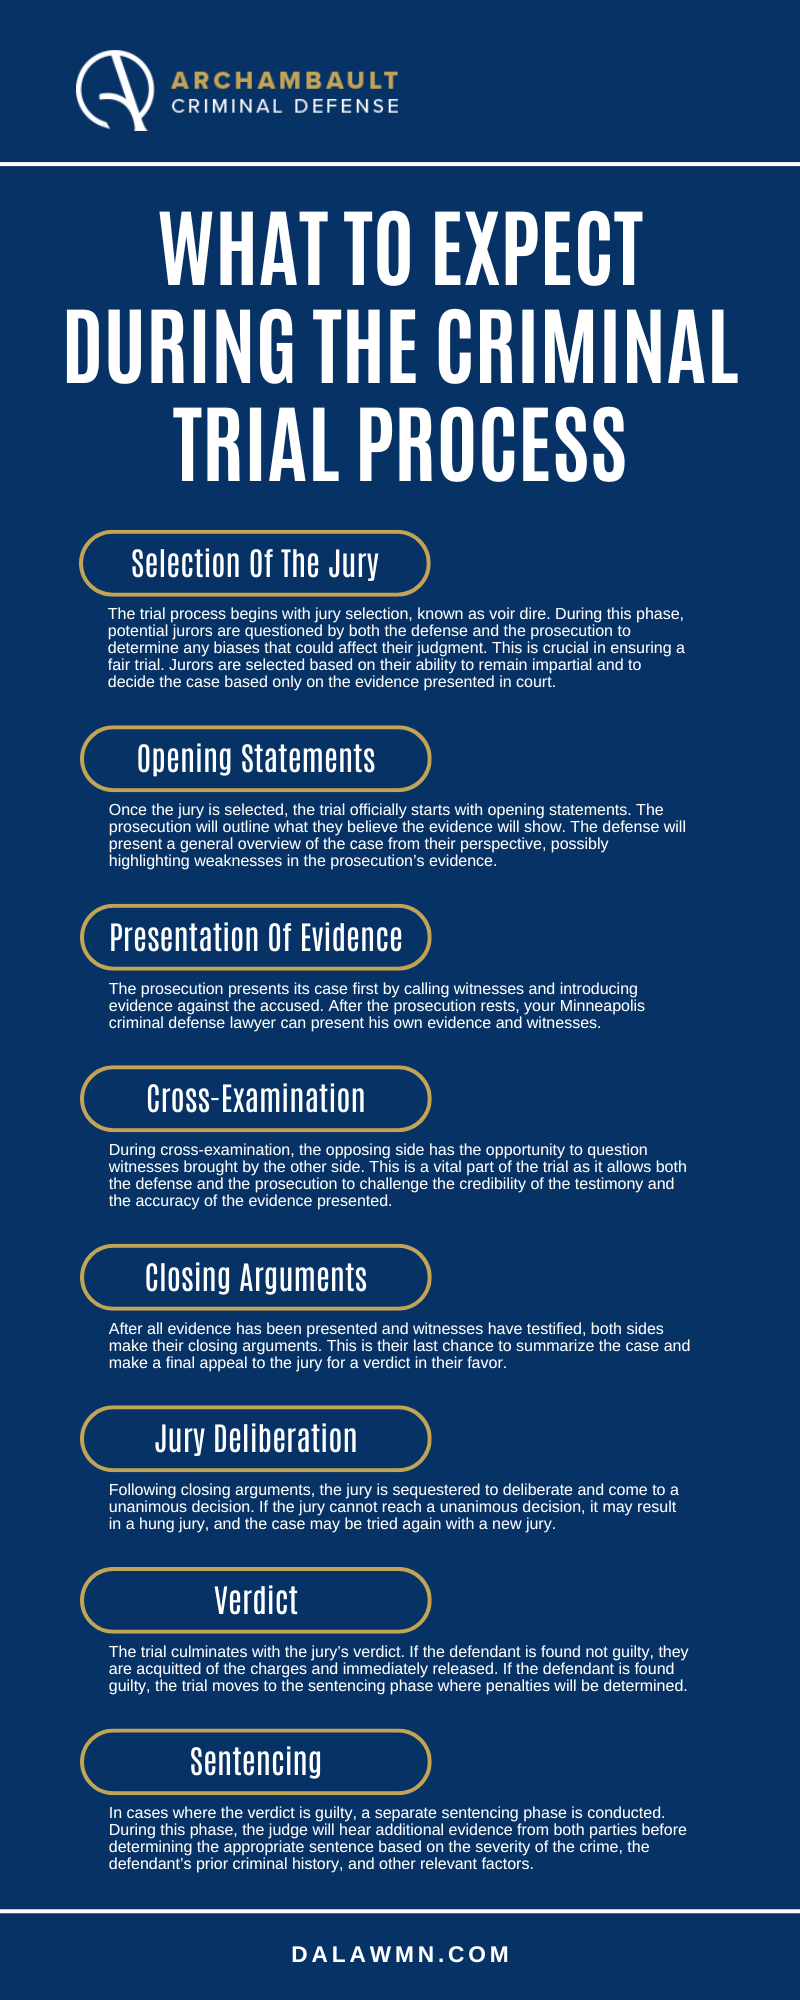 What To Expect During The Criminal Trial Process Infographic